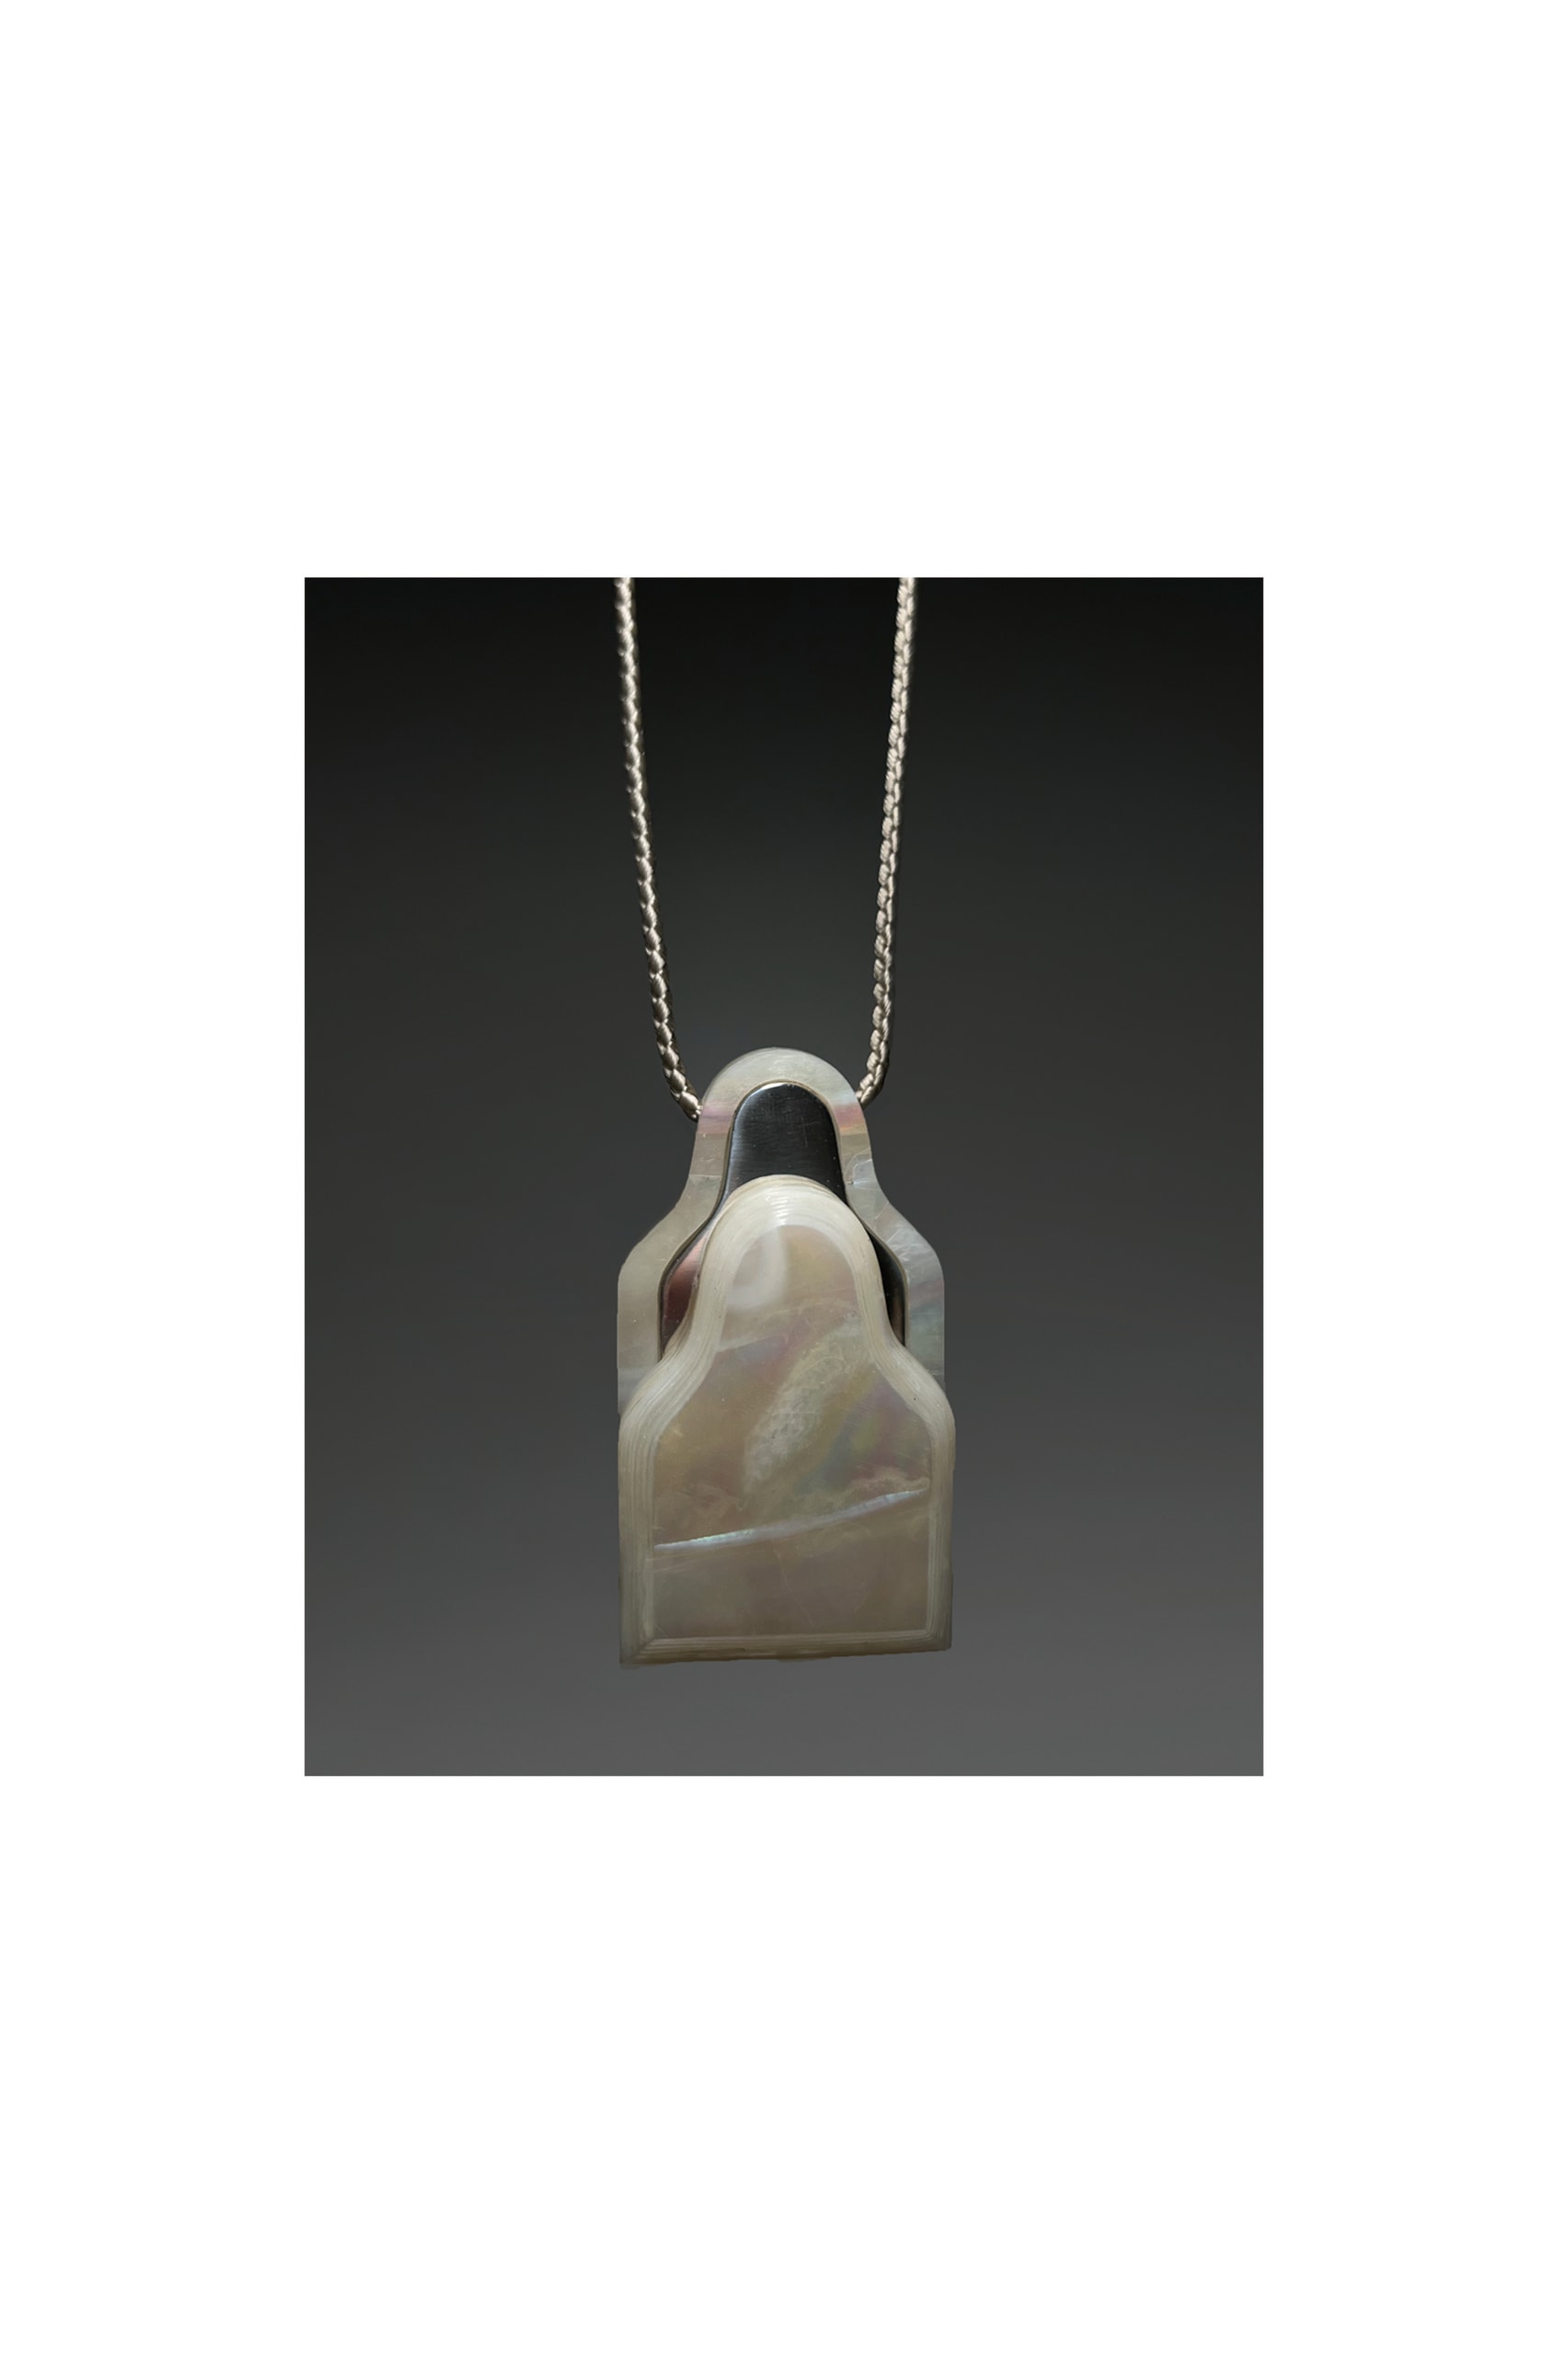 Belief, mother-of-pearl, silver, cotton rope, stainless steel wire